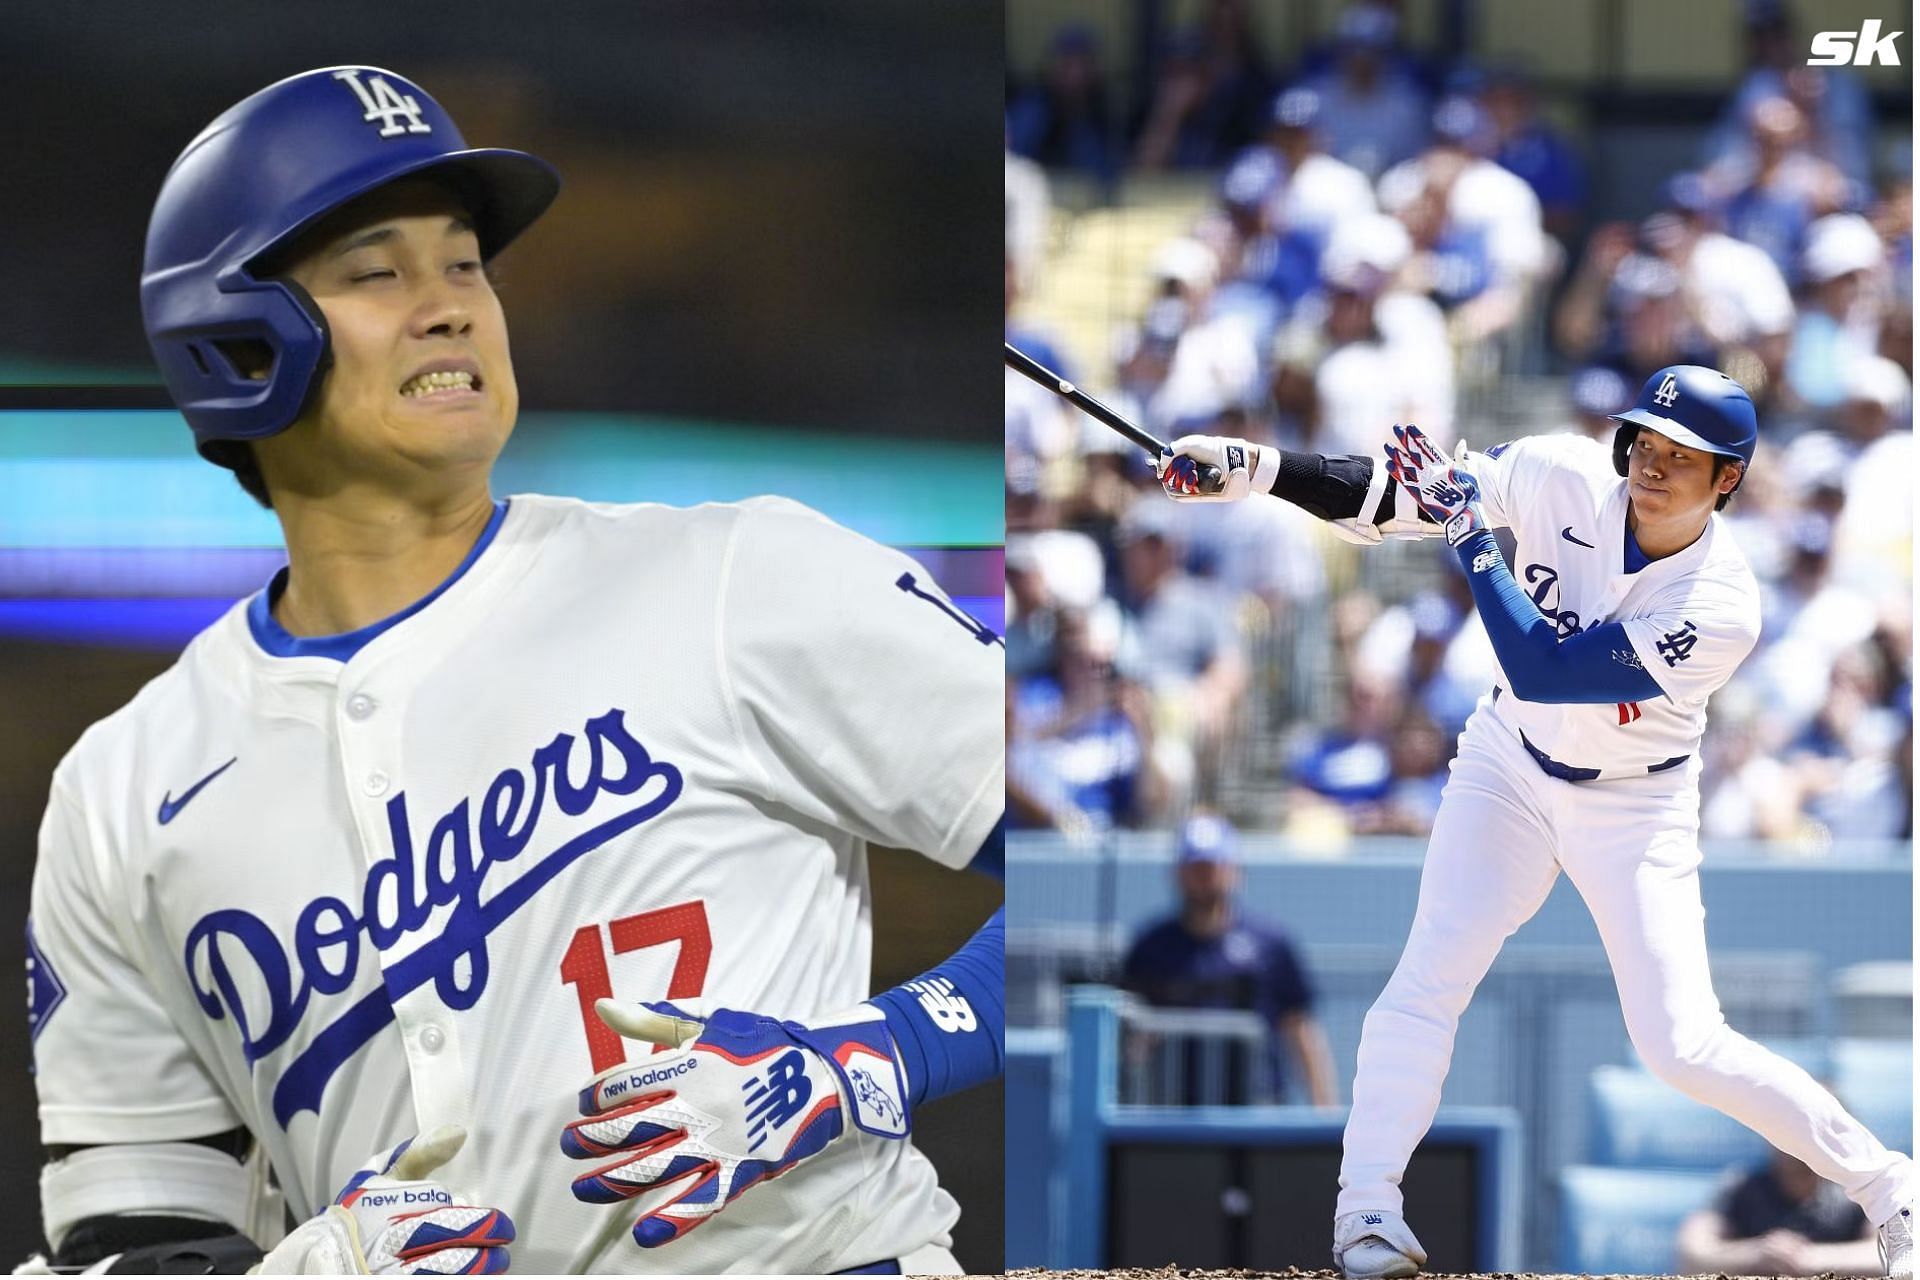  Former MLB pitcher highlights Shohei Ohtani&rsquo;s potential to lead the Dodgers